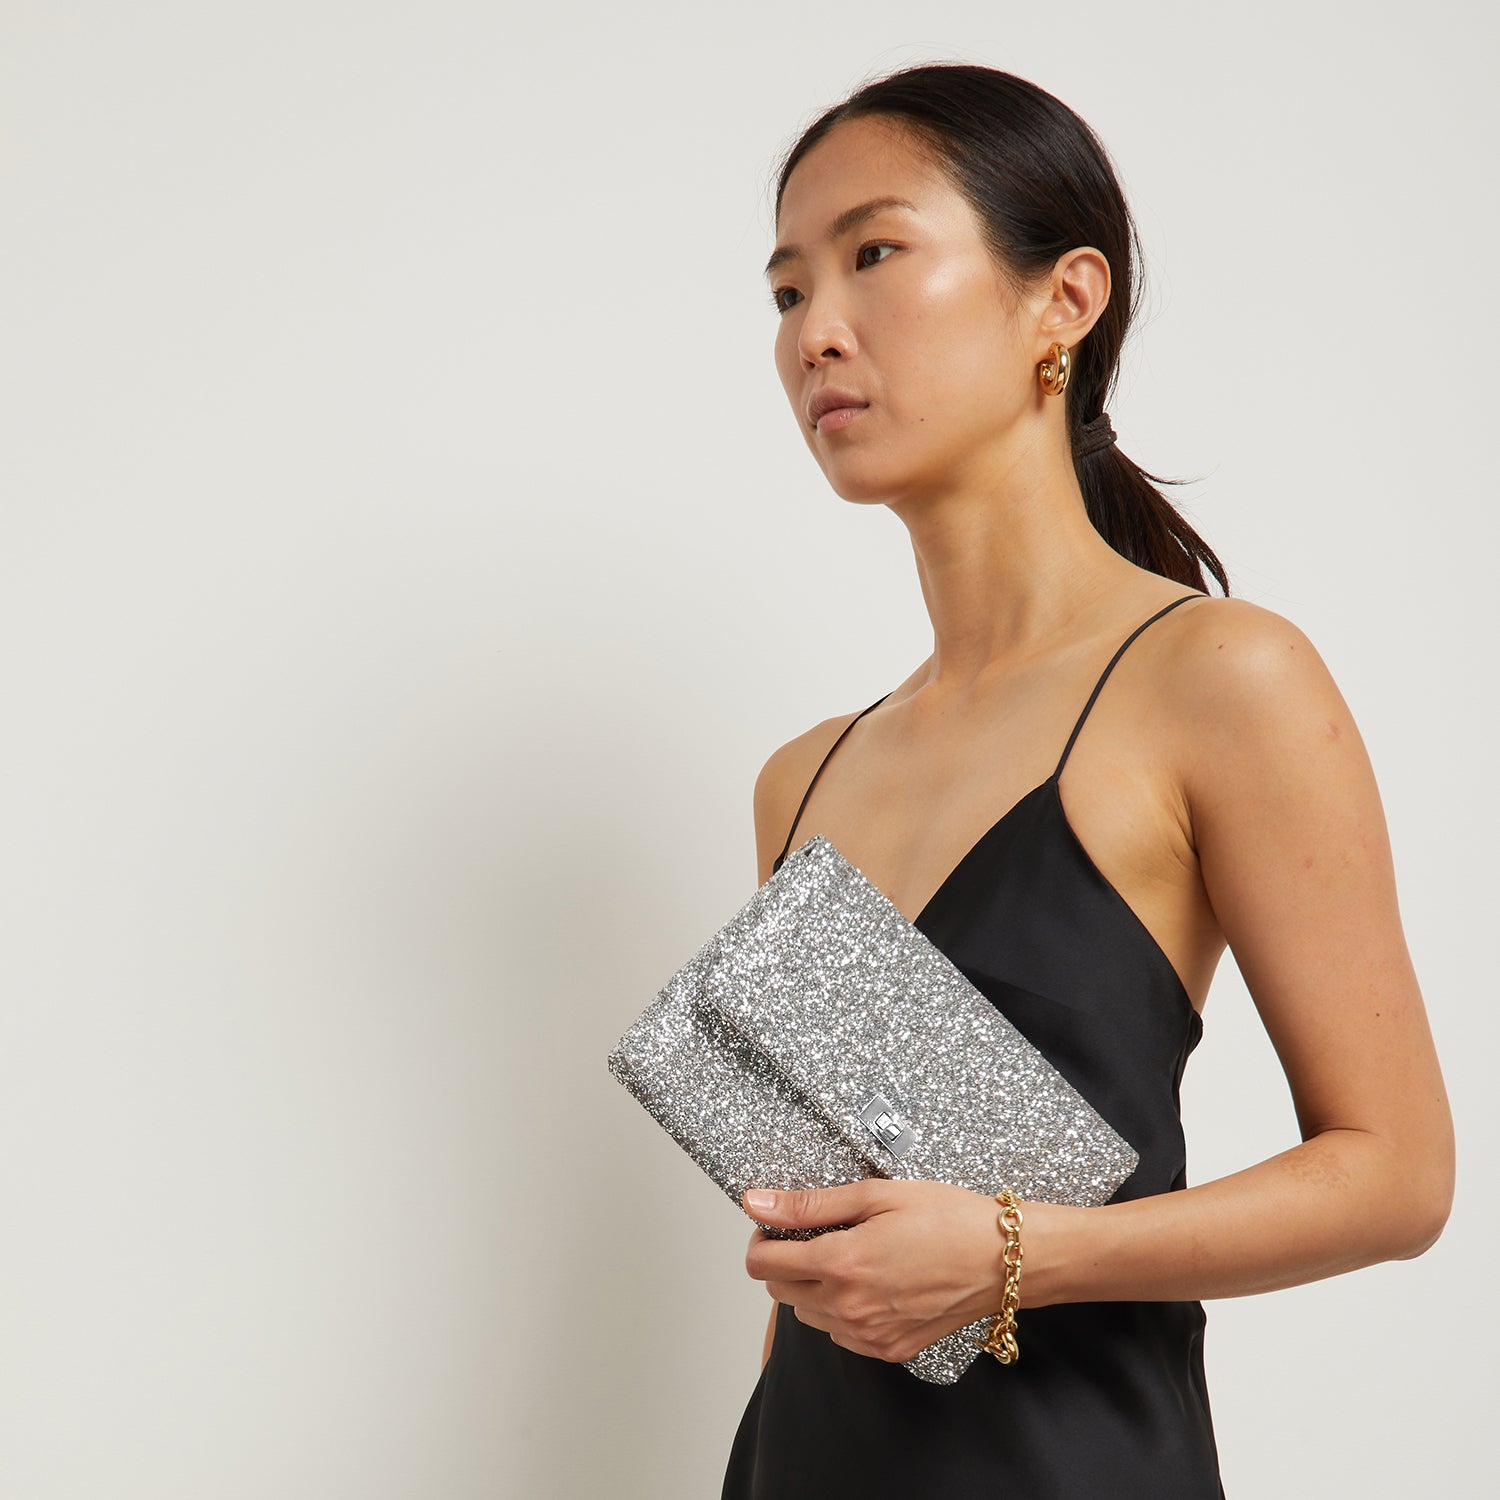 Valorie Clutch -

                  
                    Glitter in Silver -
                  

                  Anya Hindmarch US
